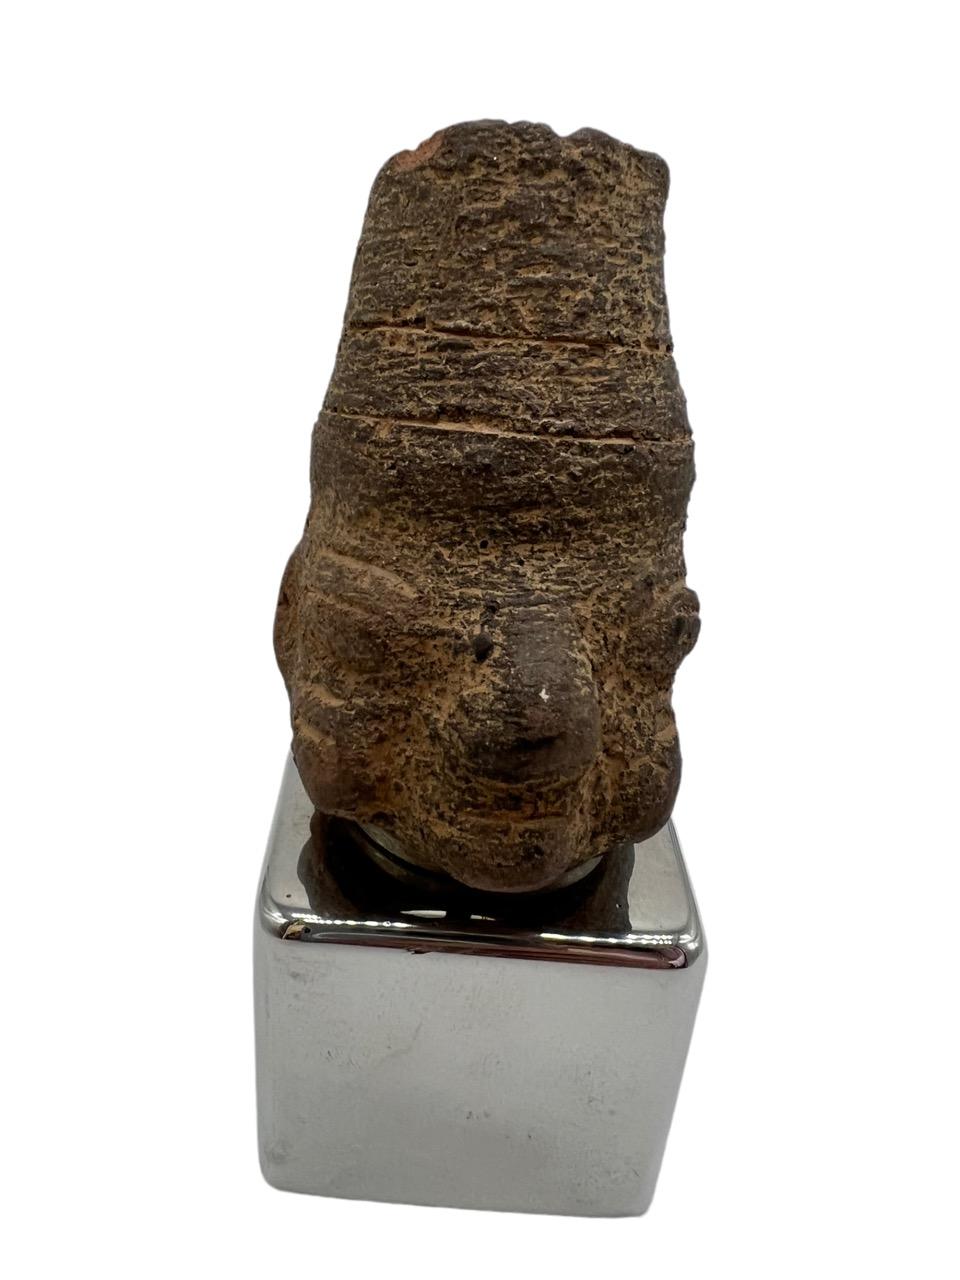 18th Century and Earlier Primitive Head Figure From the Pre-Columbian Period Made of Stone